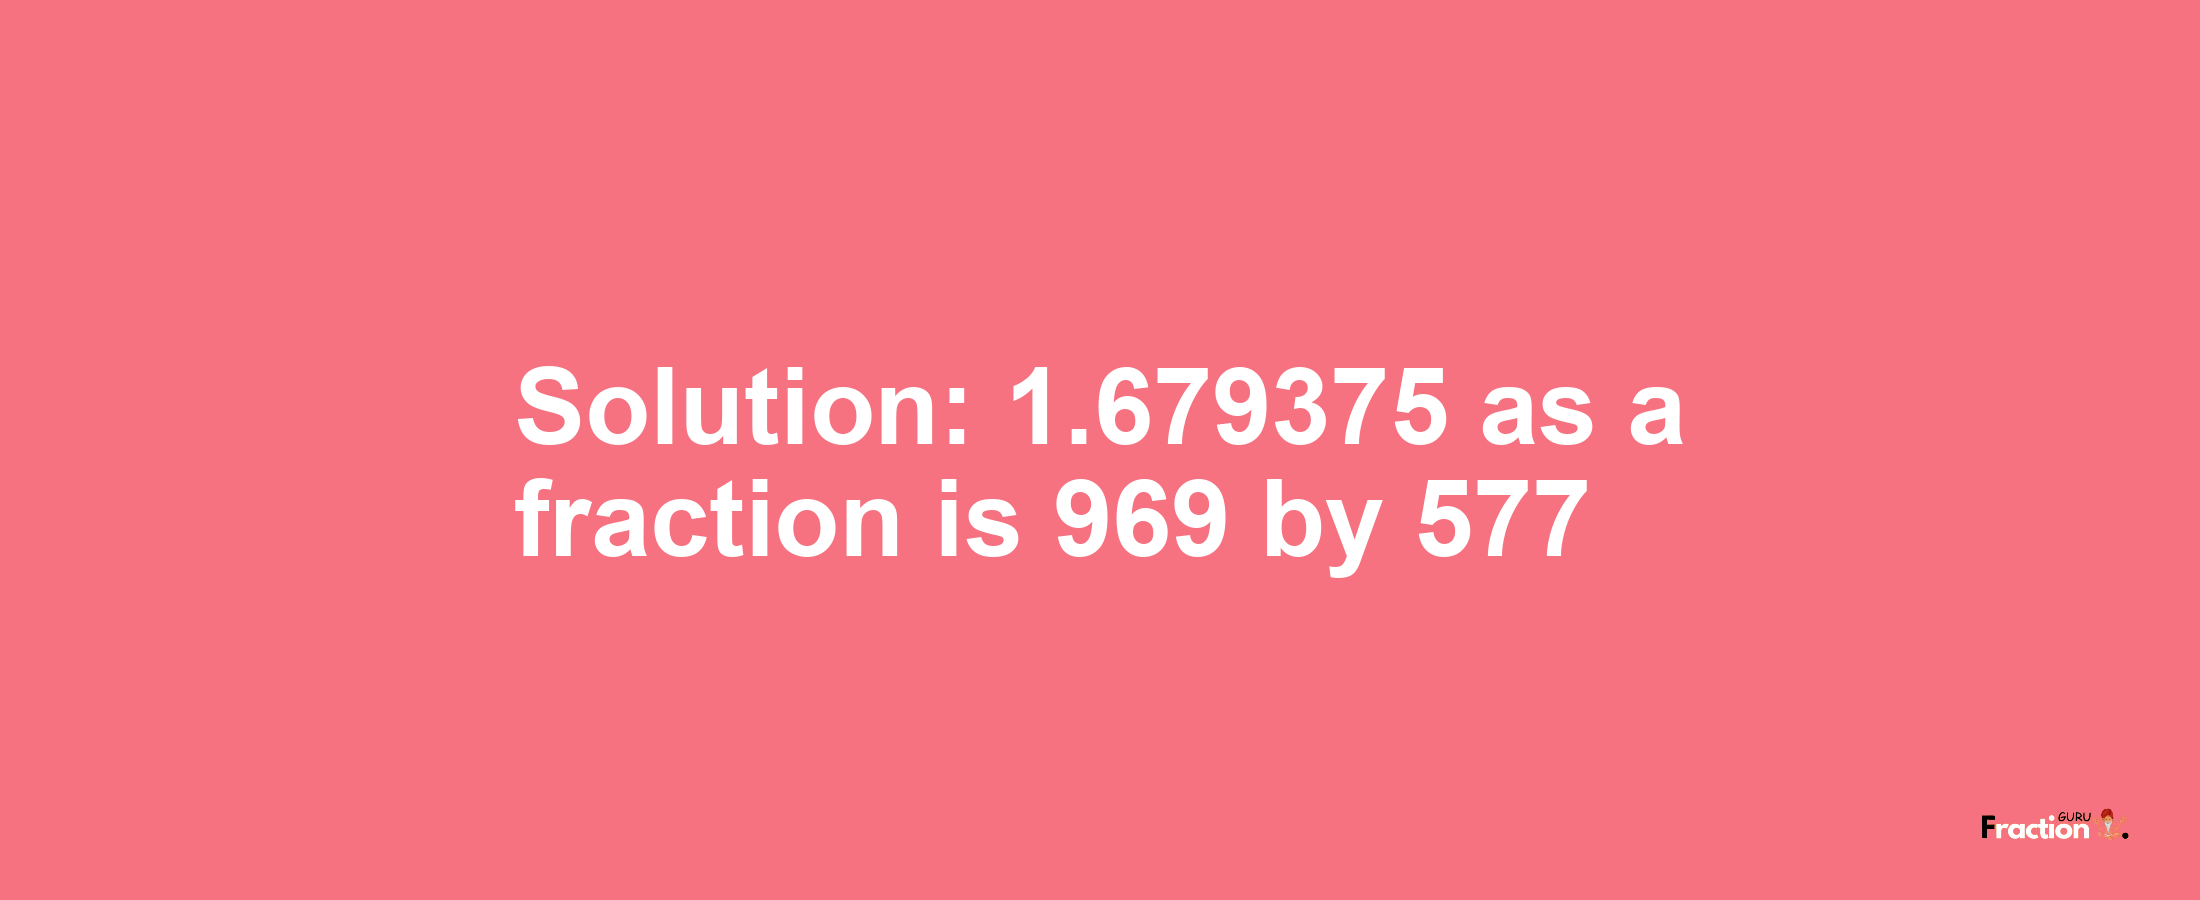 Solution:1.679375 as a fraction is 969/577